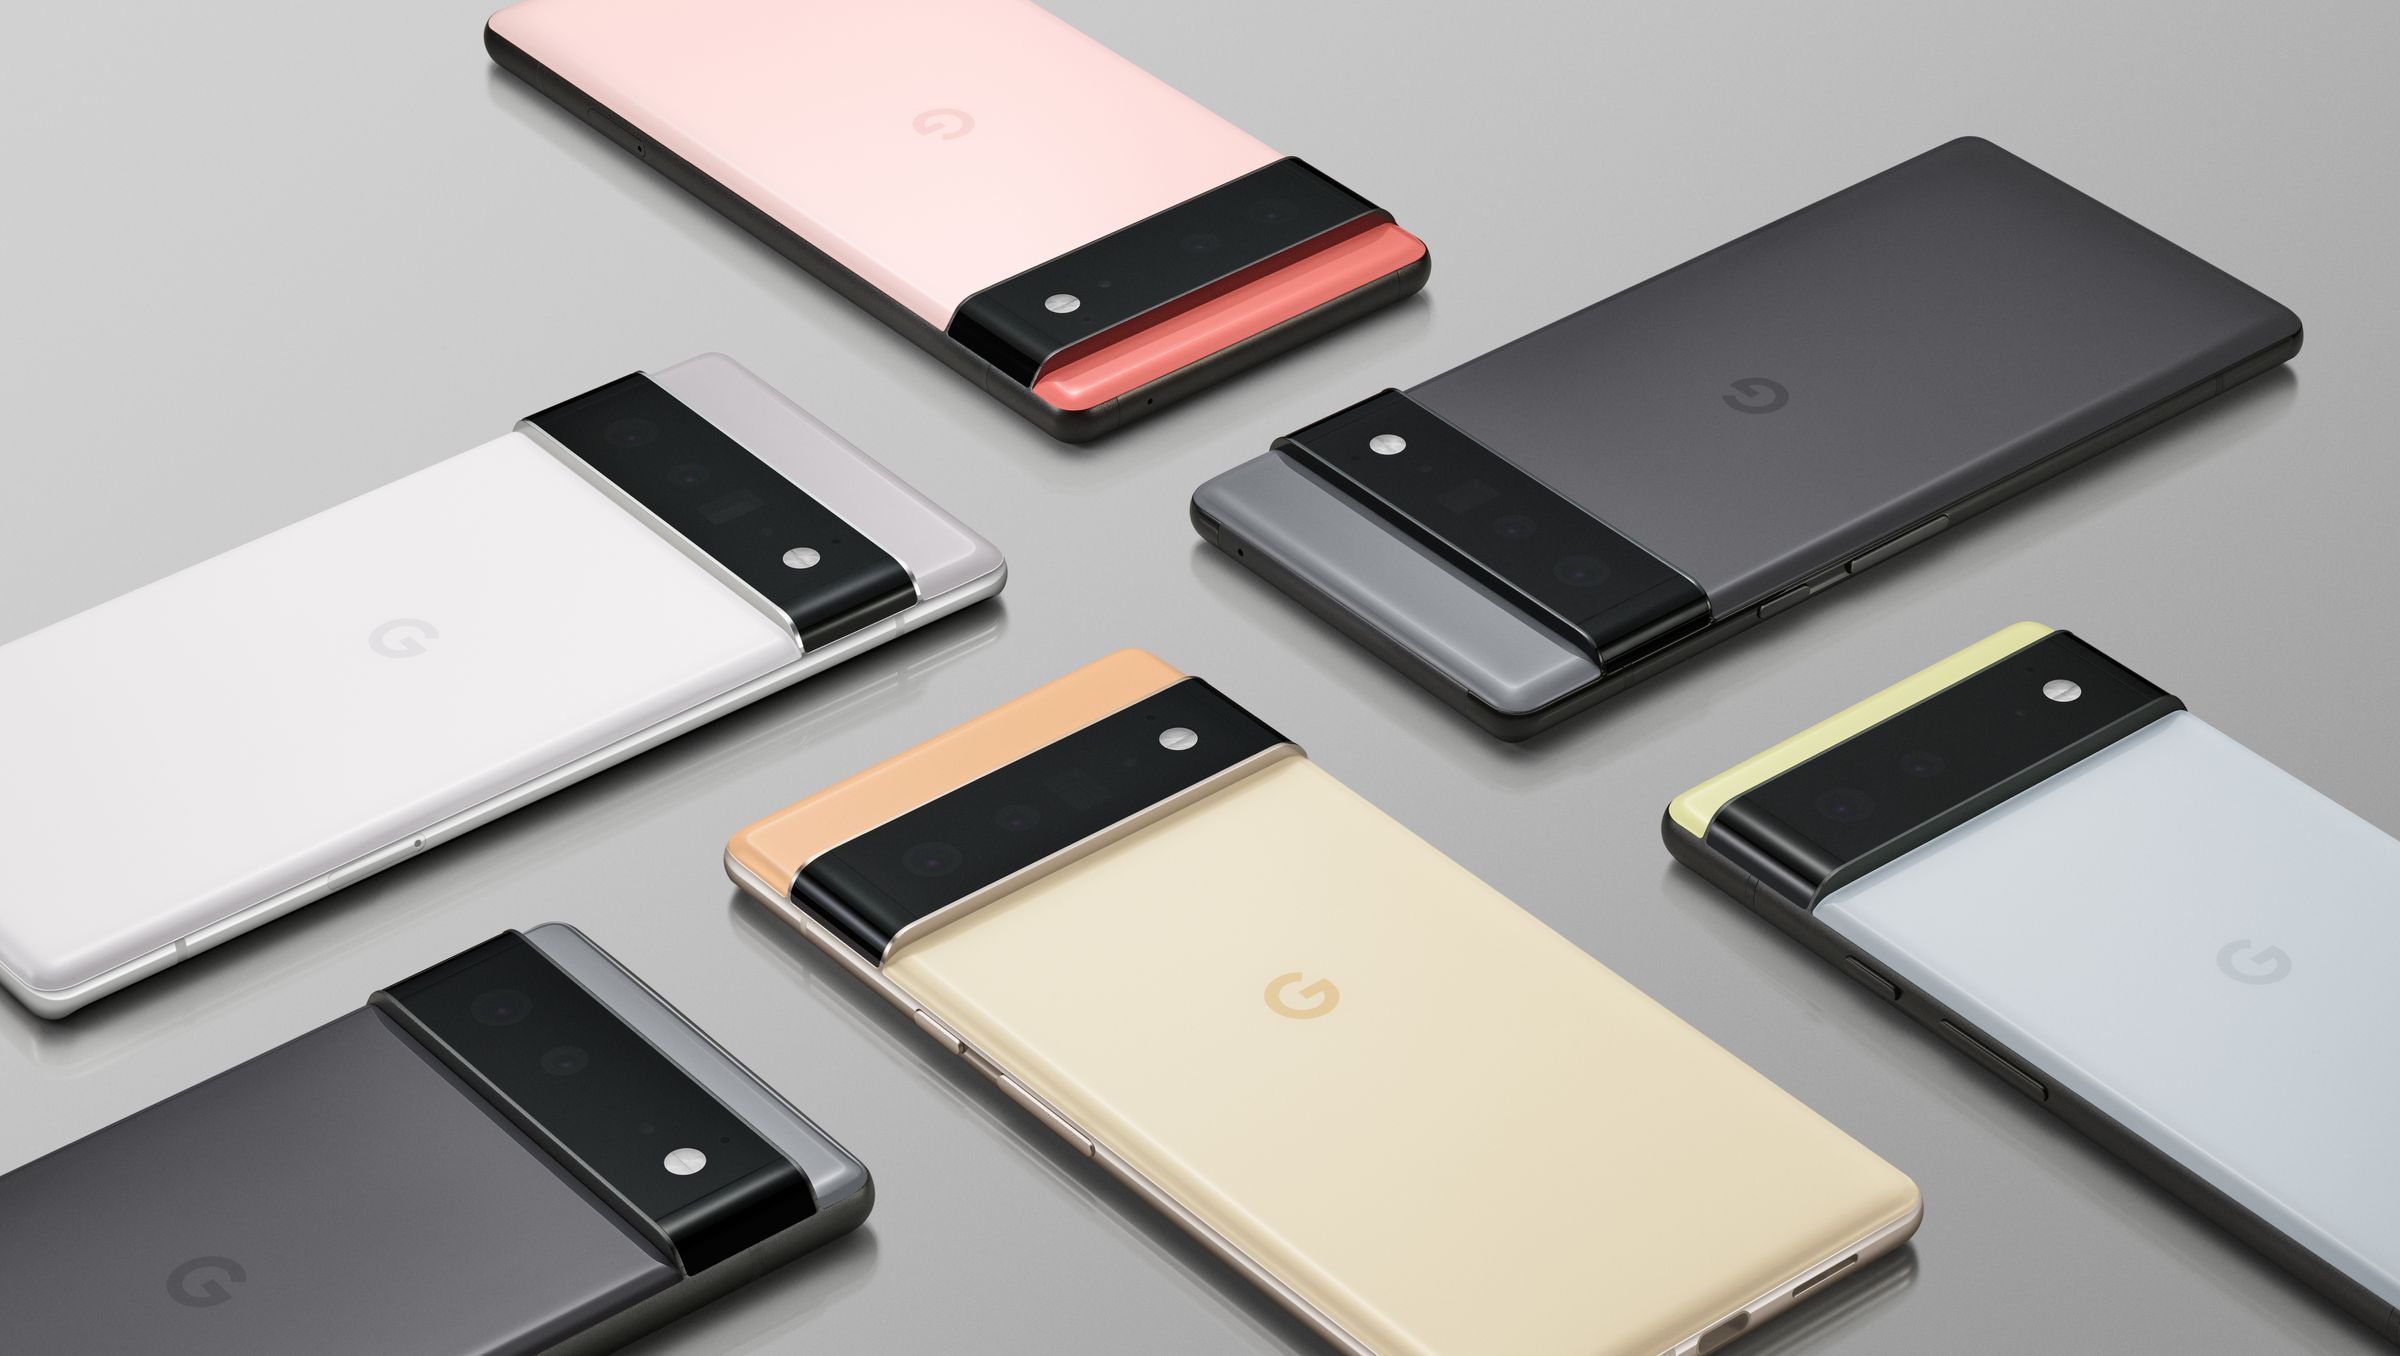 The Google Pixel 6 and 6 Pro lineup